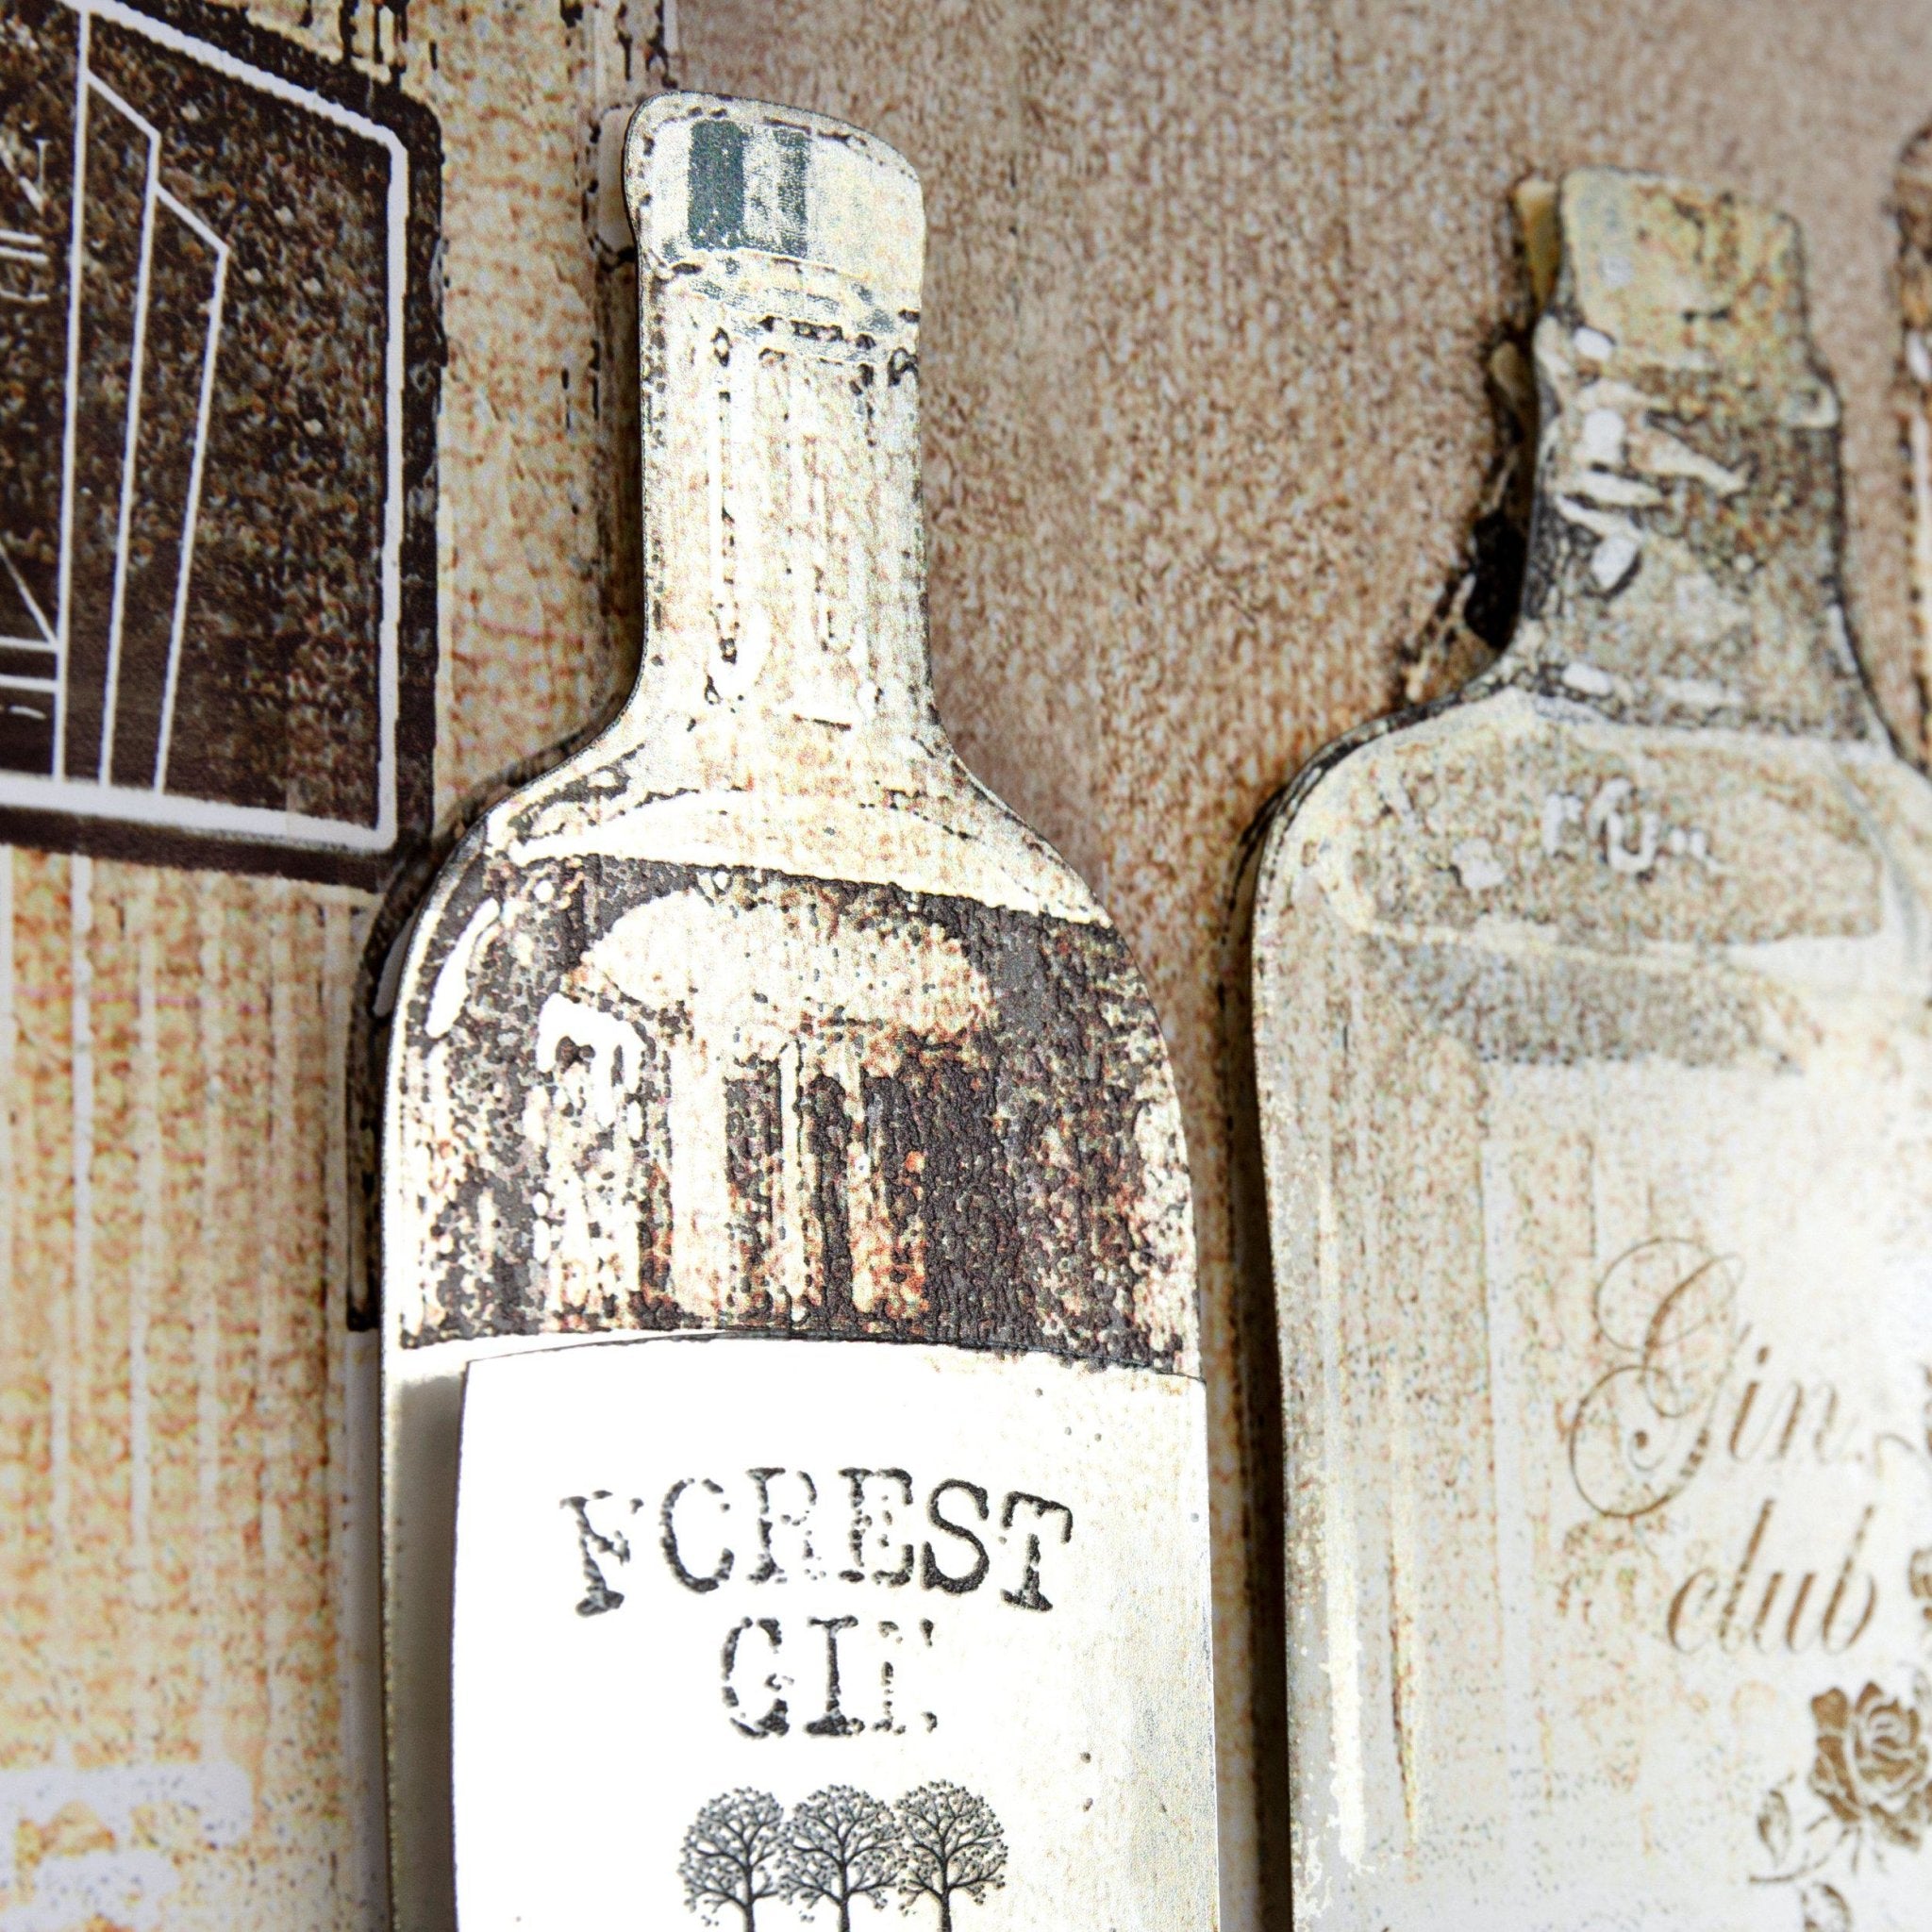 Gin Collection by Charlotte Oakley - Duck Barn Interiors